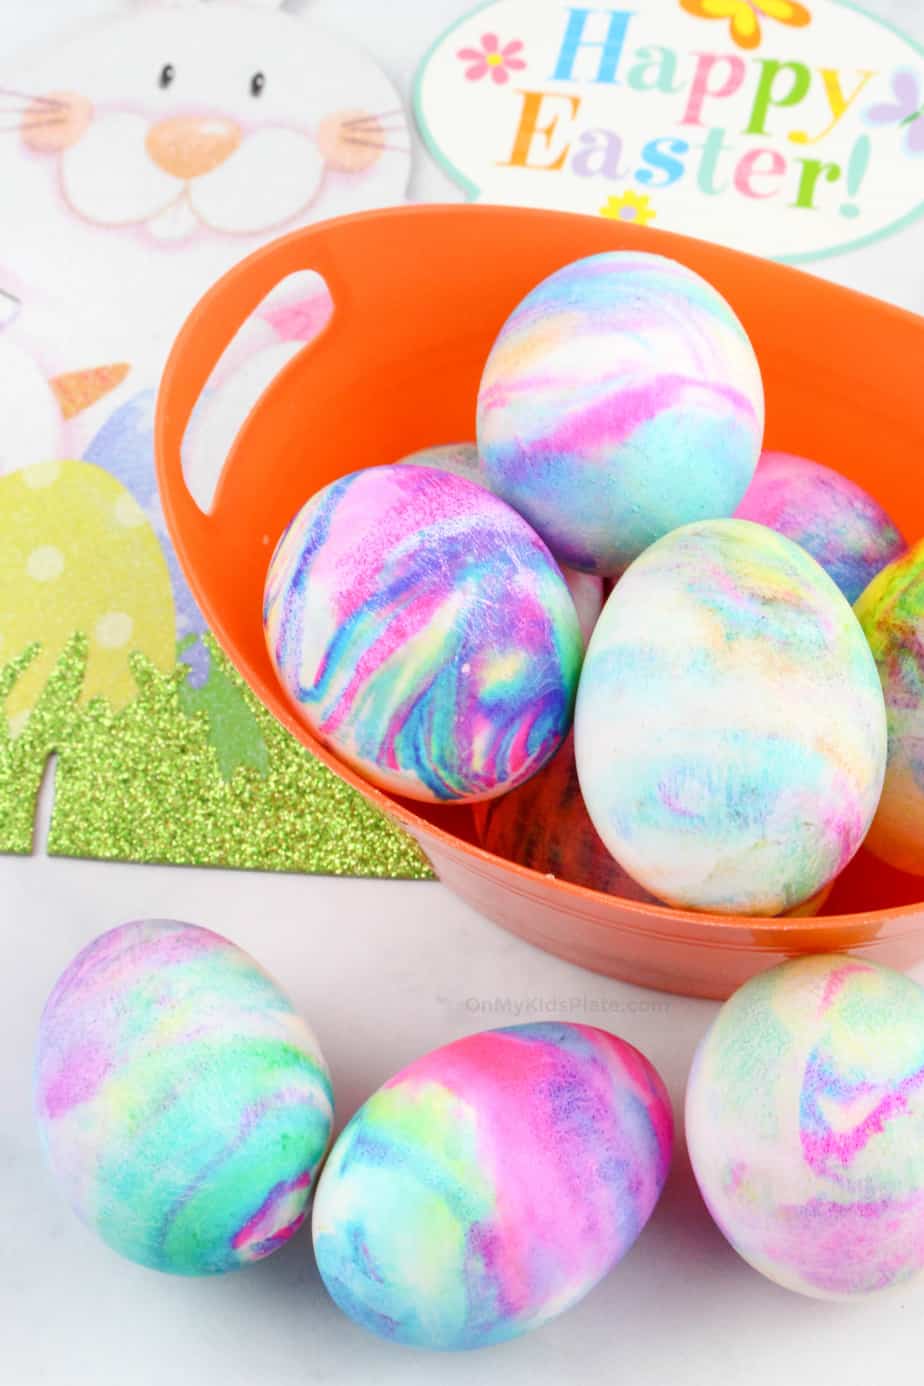 Marbled dyed colorful Easter Eggs in a basket and in front of the basket.